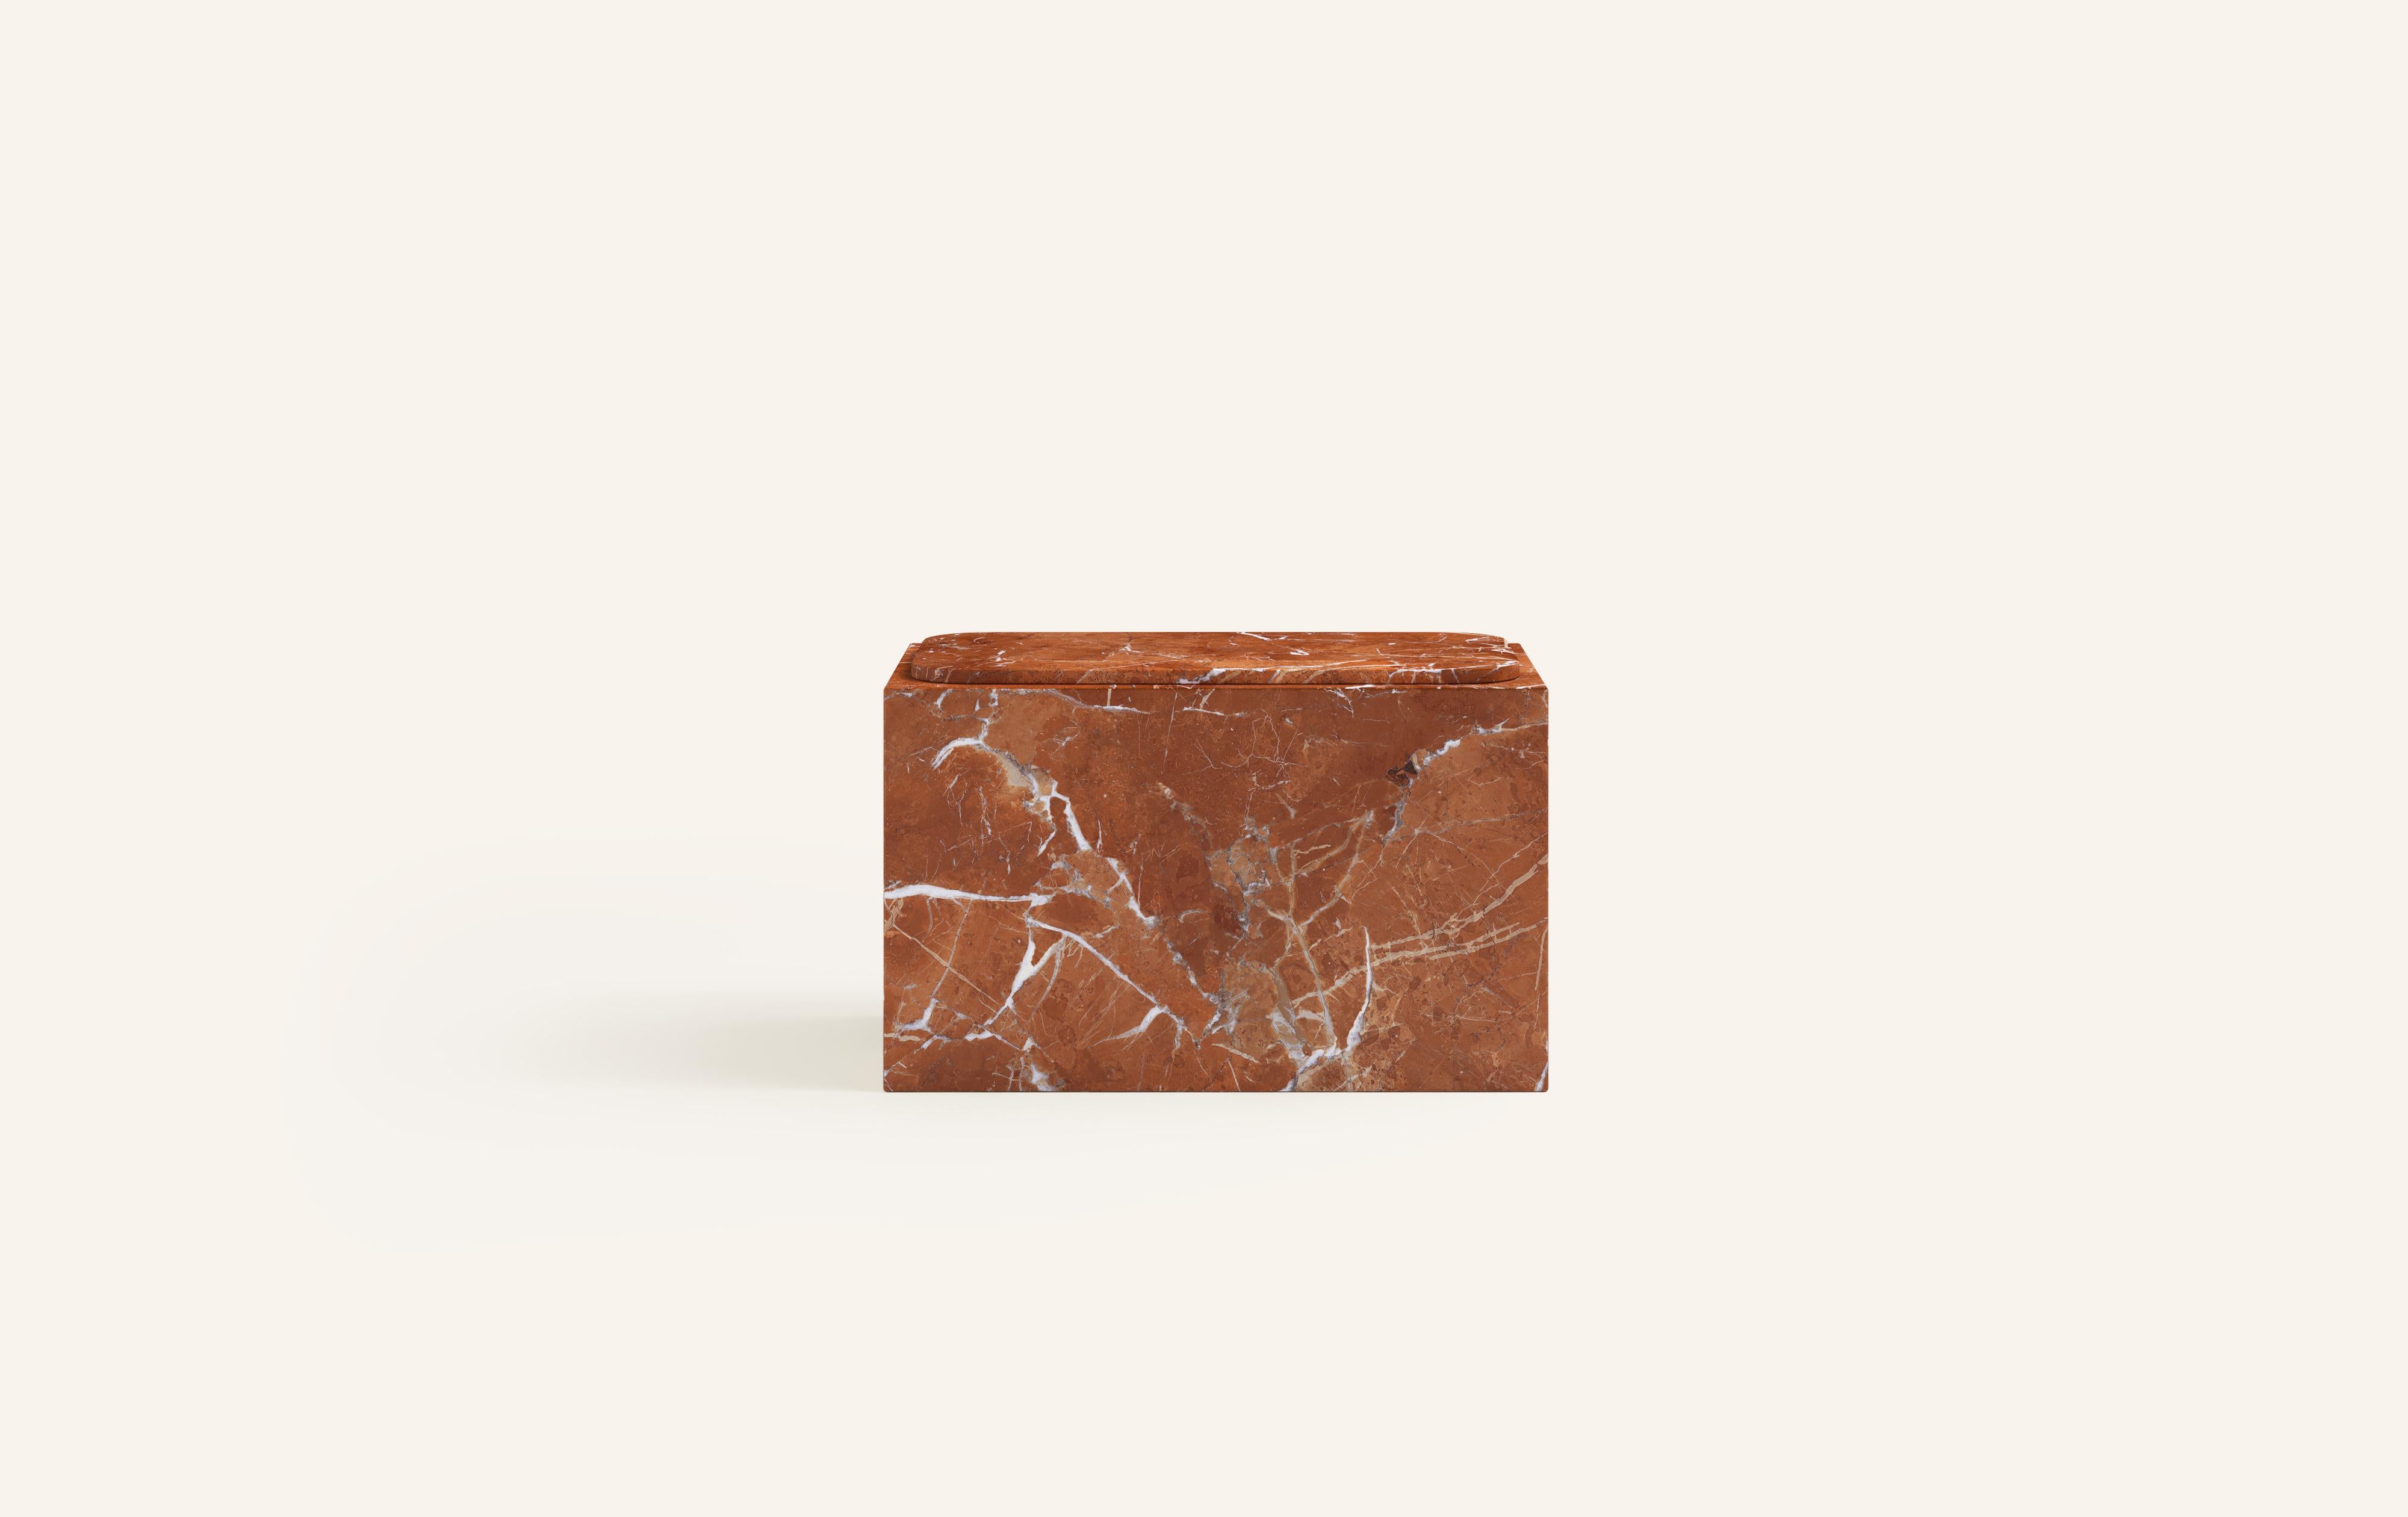 MONOLITHIC FORMS SOFTENED BY GENTLE EDGES. WITH ITS BOLD MARBLE PATTERNS CUBO IS AS VERSATILE AS IT IS STRIKING.

DIMENSIONS:
30”L x 16”W x 19”H:
- 3/4